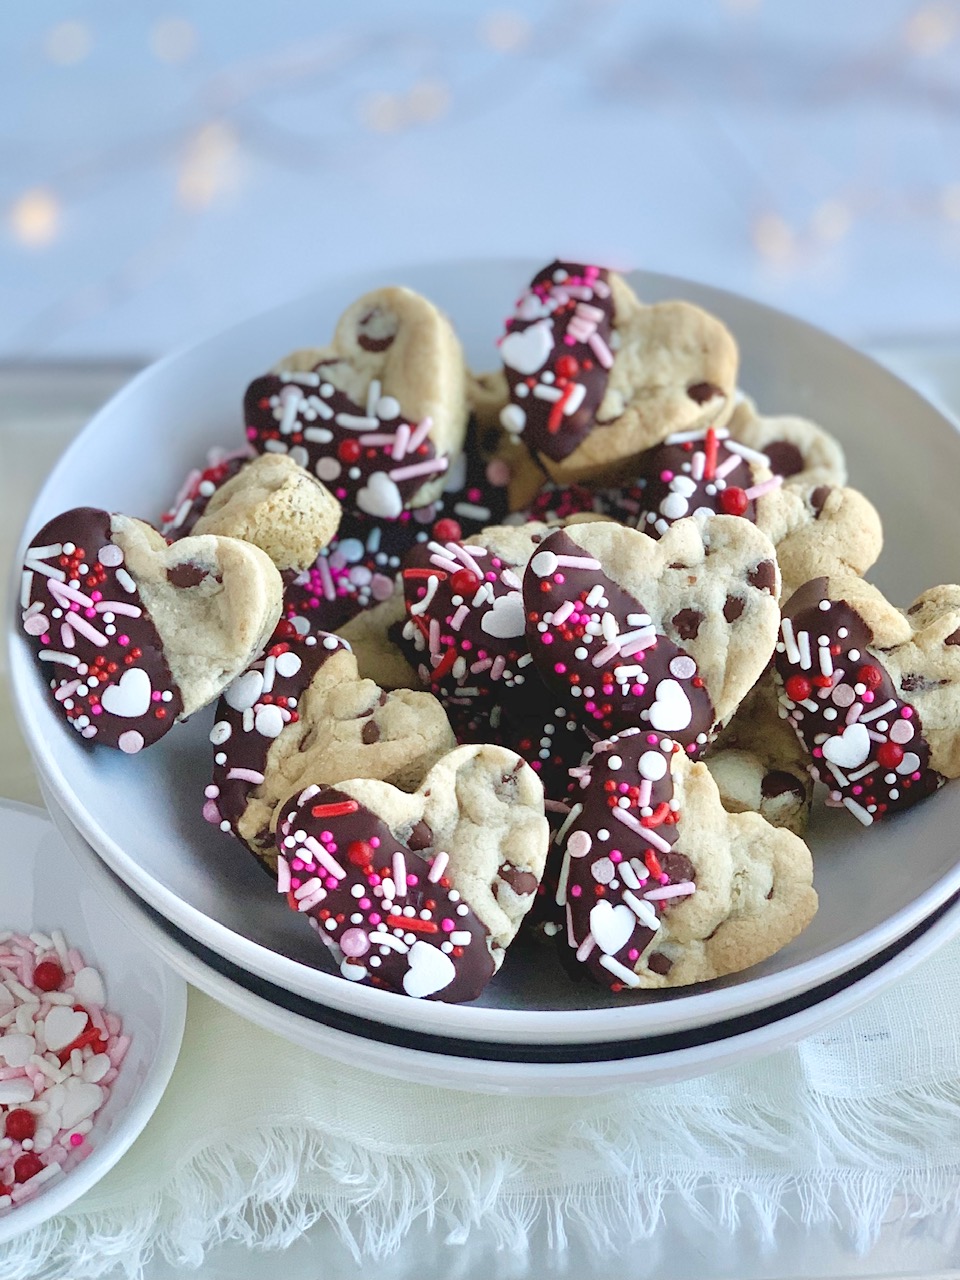 Valentine's Day Chocolate Chip Cookies - Eating Gluten and Dairy Free